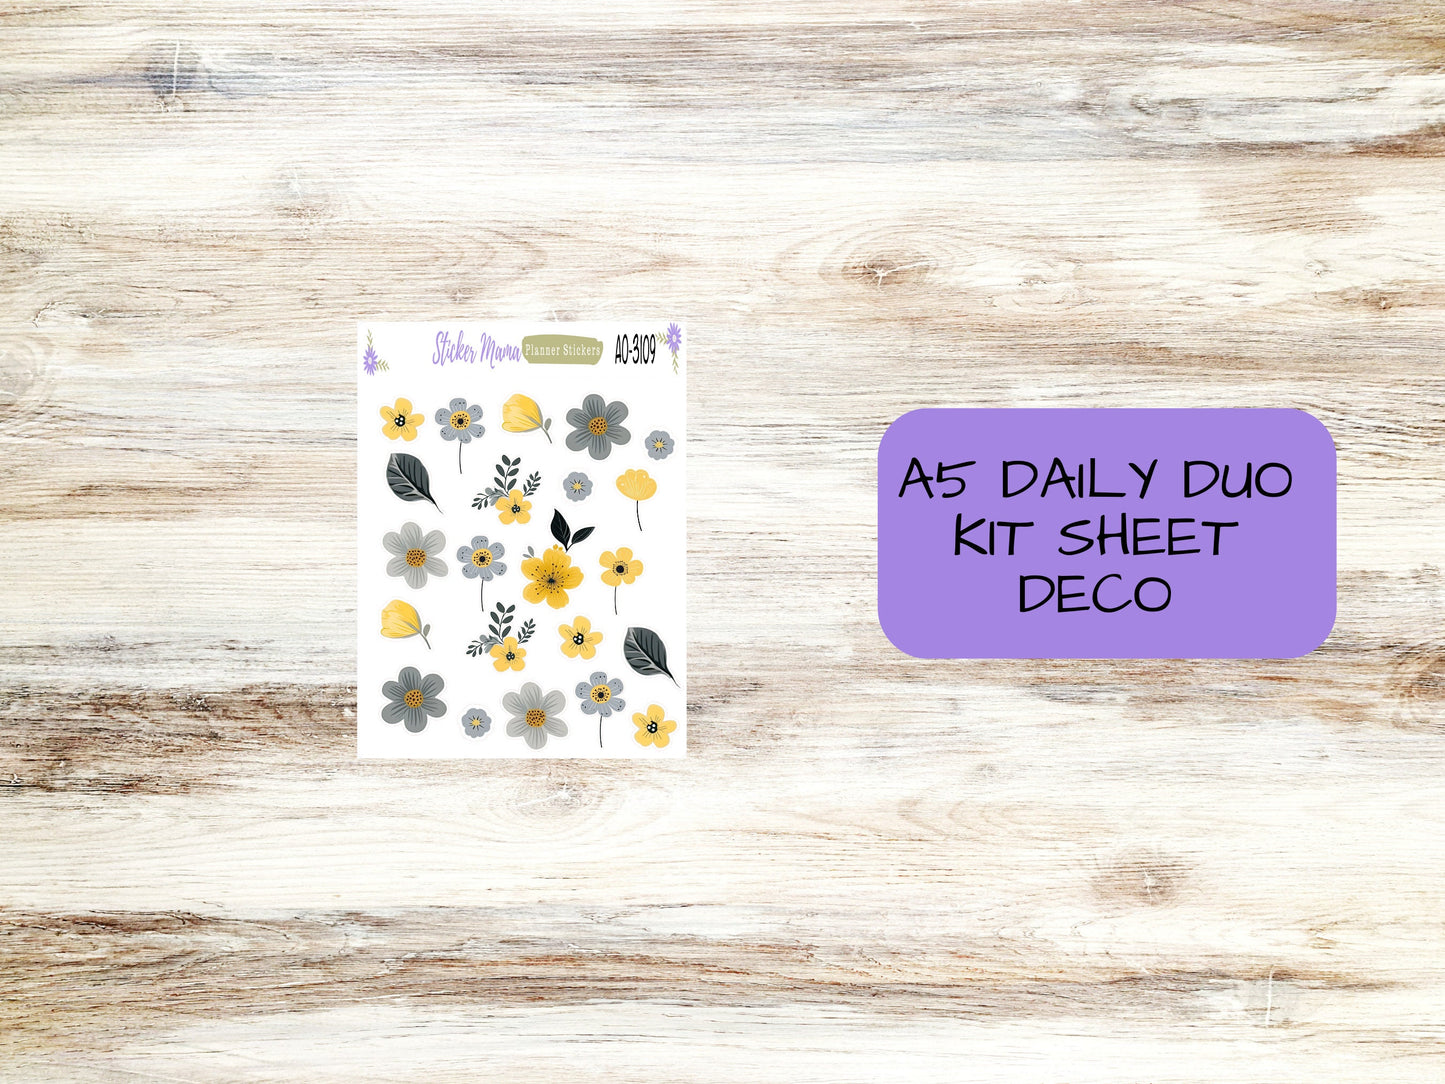 A5-DAILY DUO-Kit #3109 || Grey and Yellow Floral  || Planner Stickers - Daily Duo A5 Planner - Daily Duo Stickers - Daily Planner